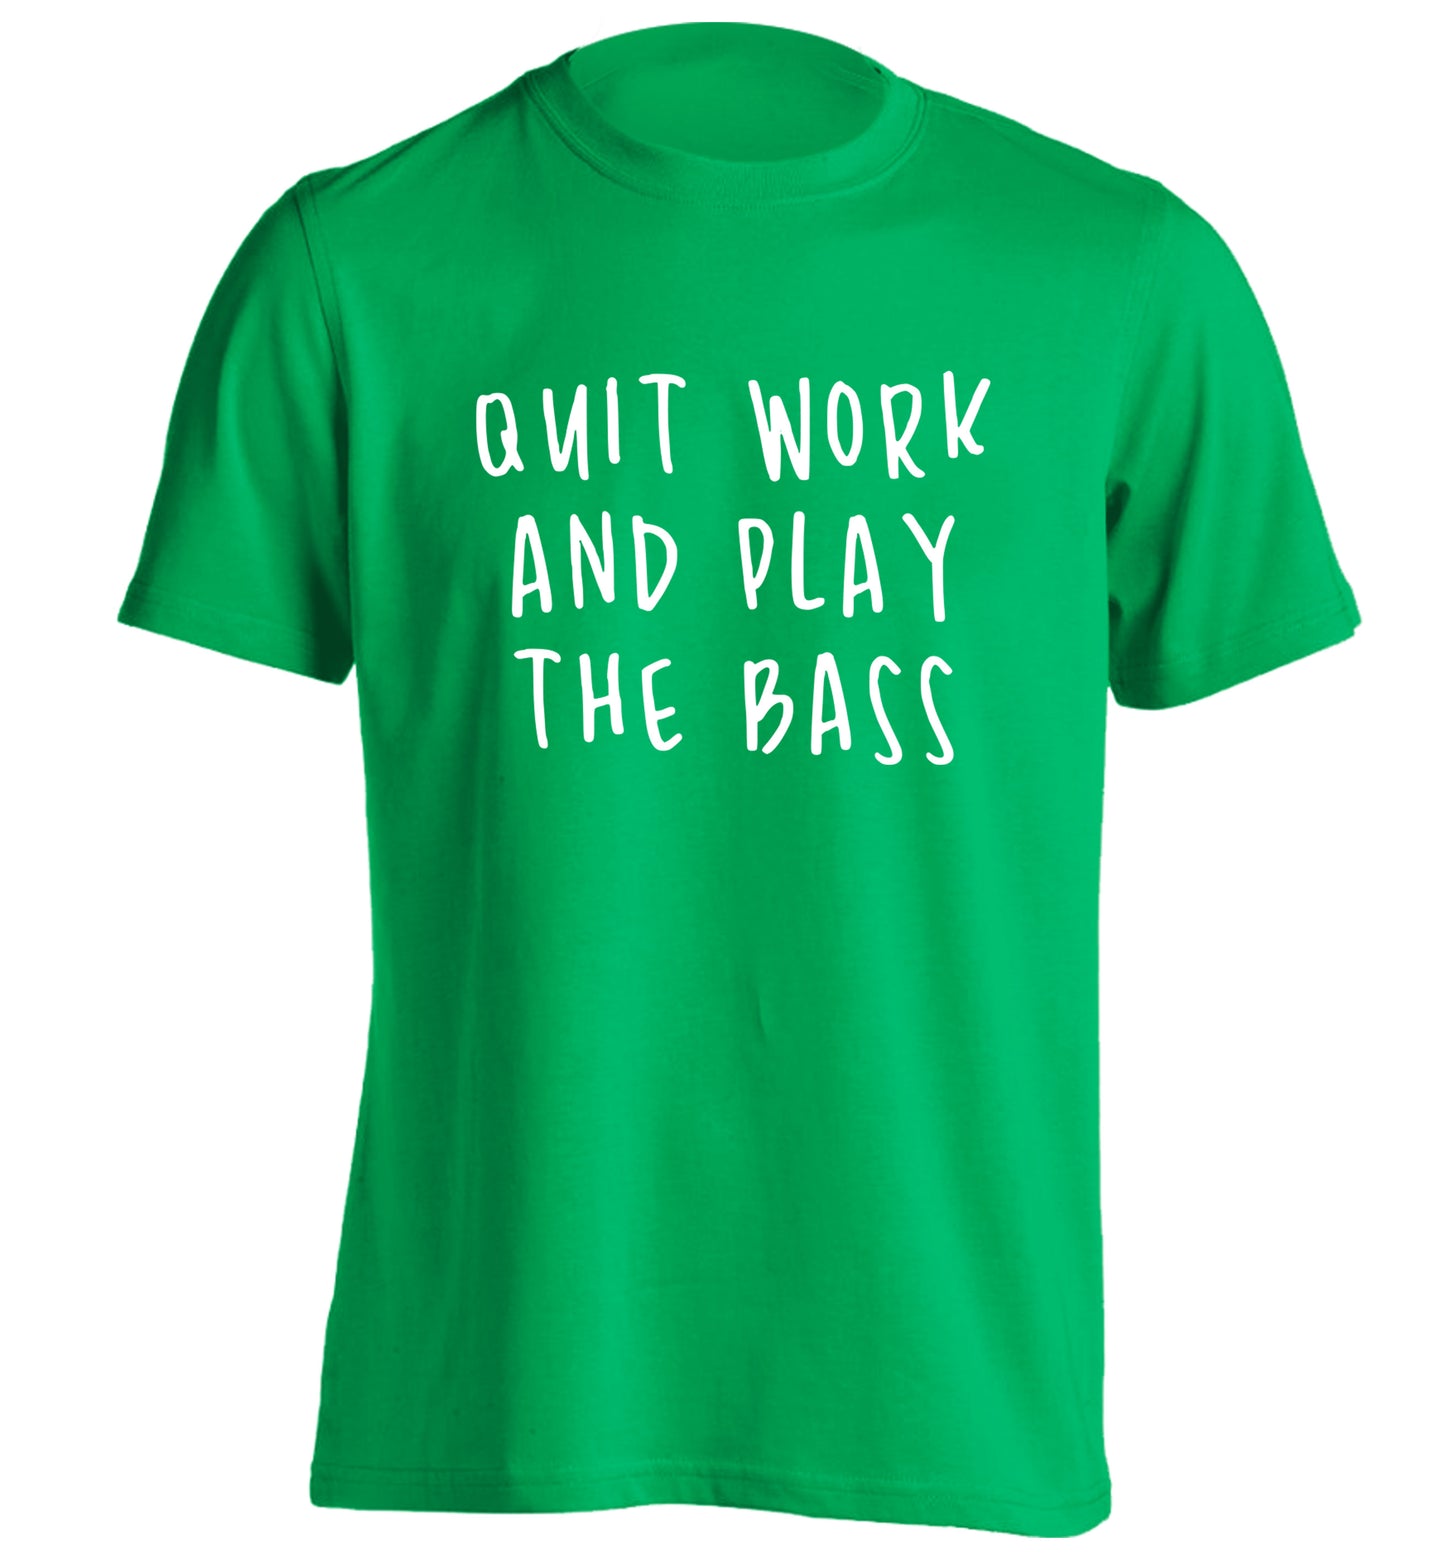 Quit work and play the bass adults unisex green Tshirt 2XL